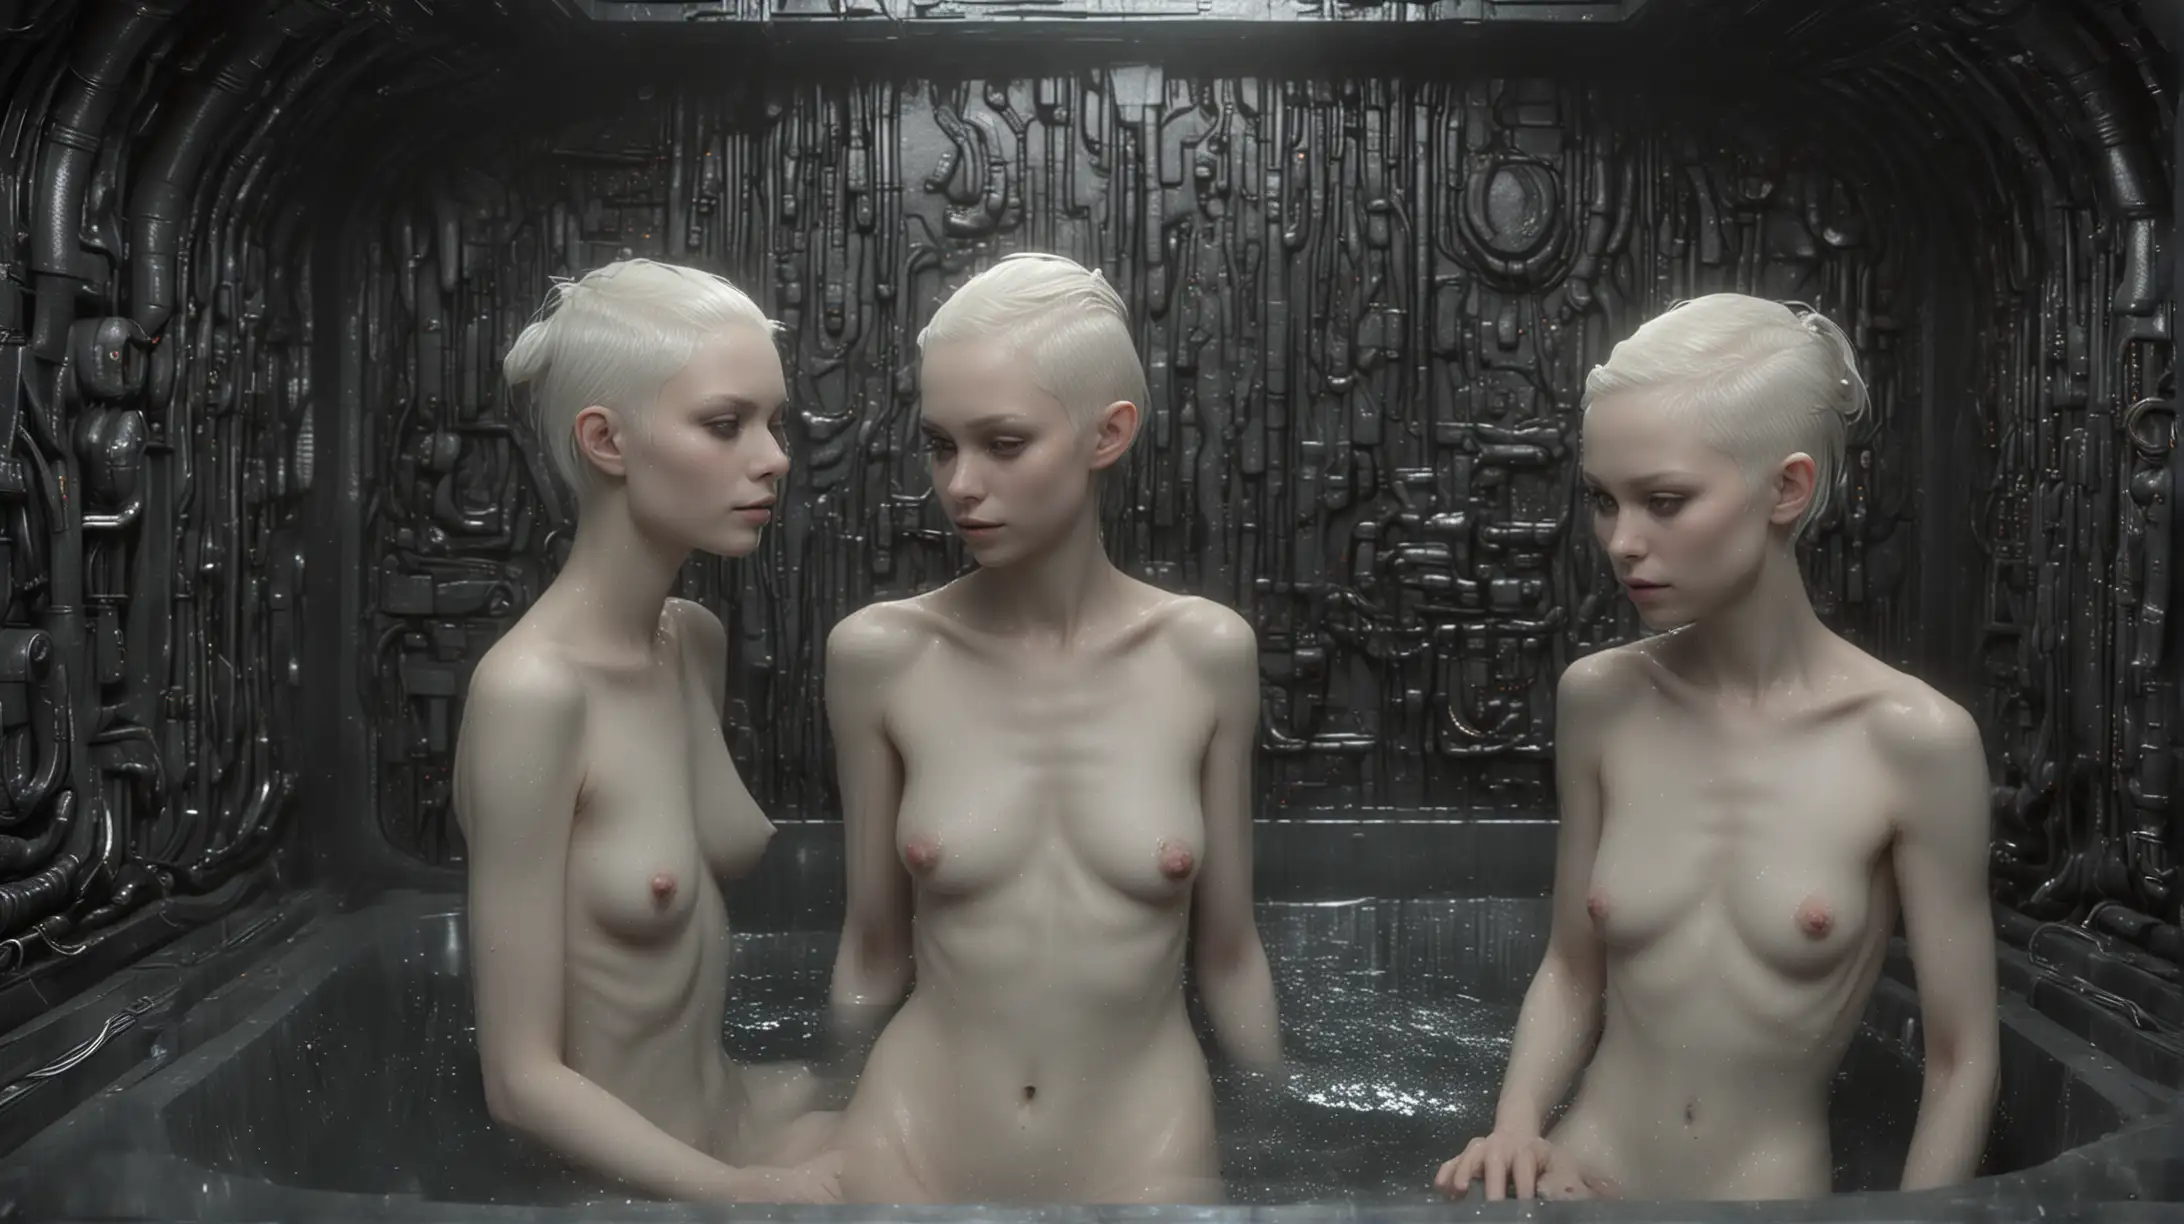 Cryptic SciFi Scene Sultry Young Concubines in GigerStyle Bath